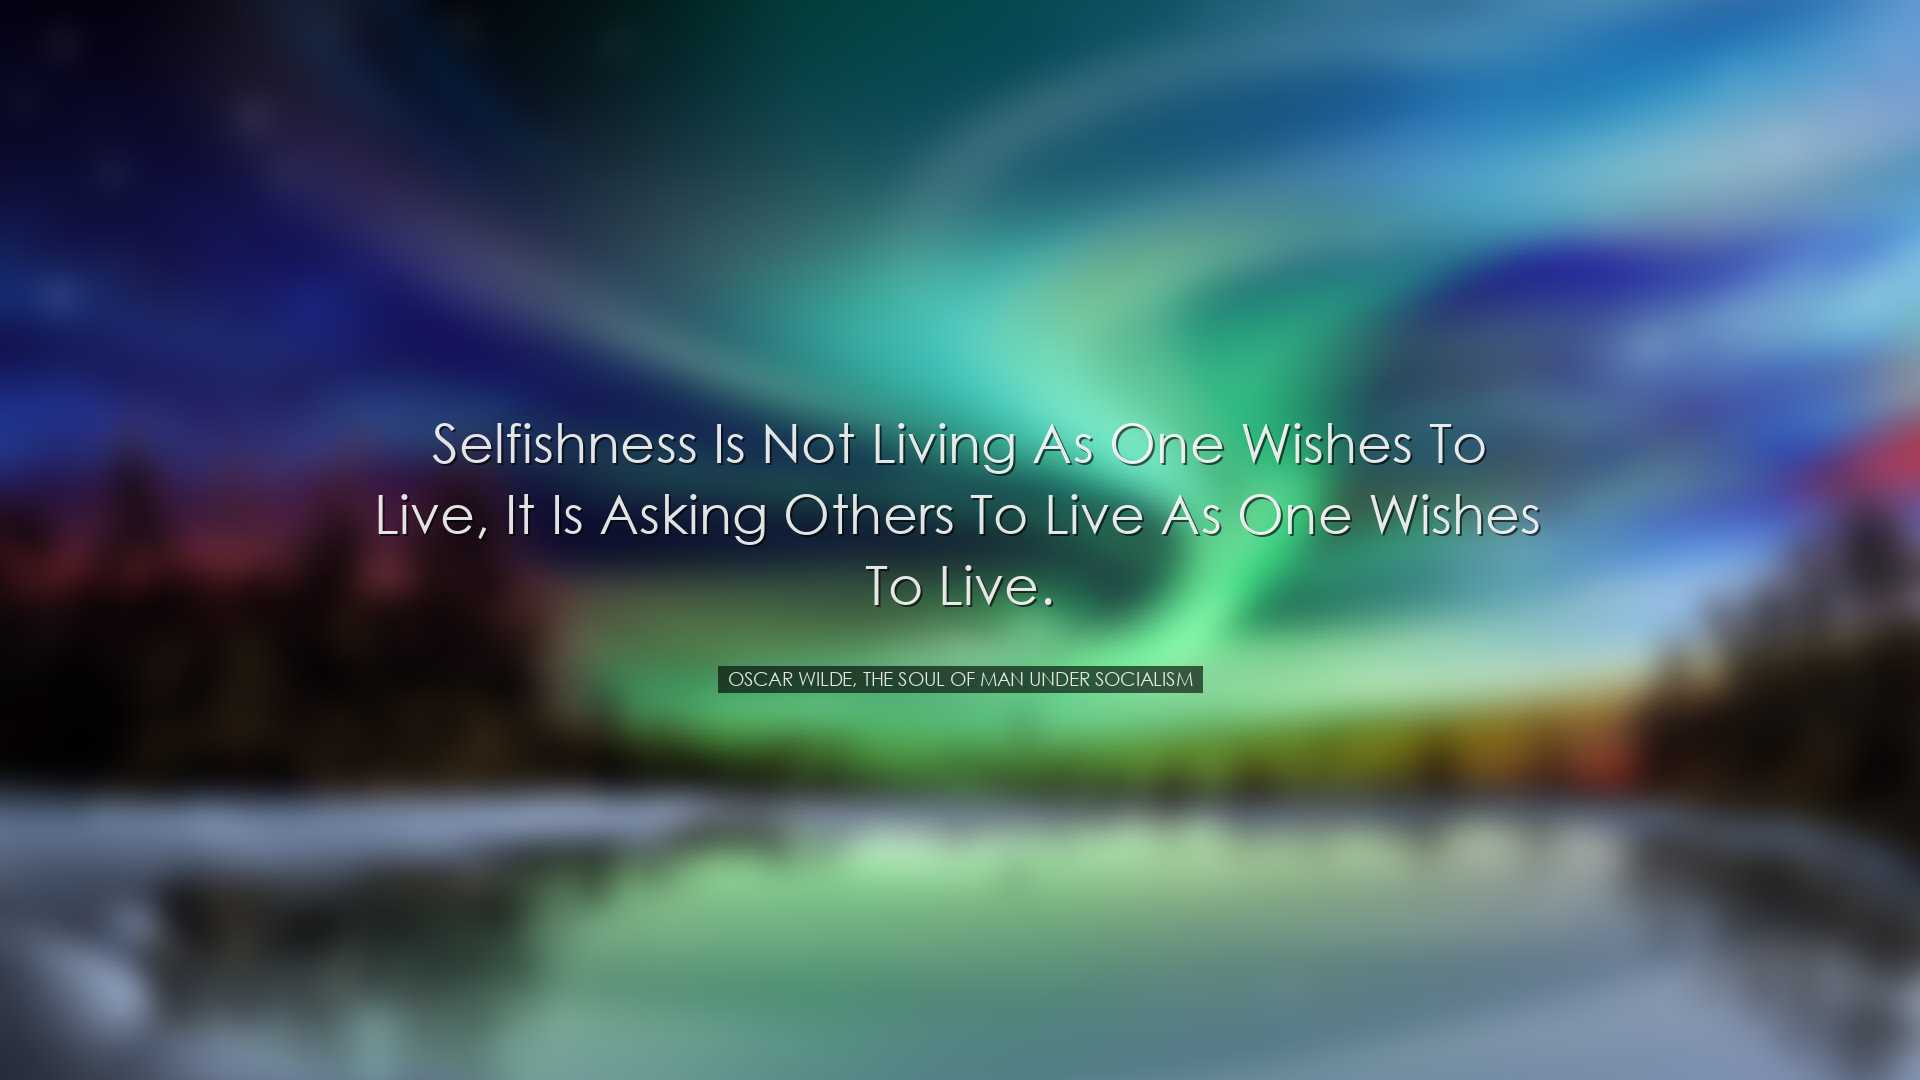 Selfishness is not living as one wishes to live, it is asking othe